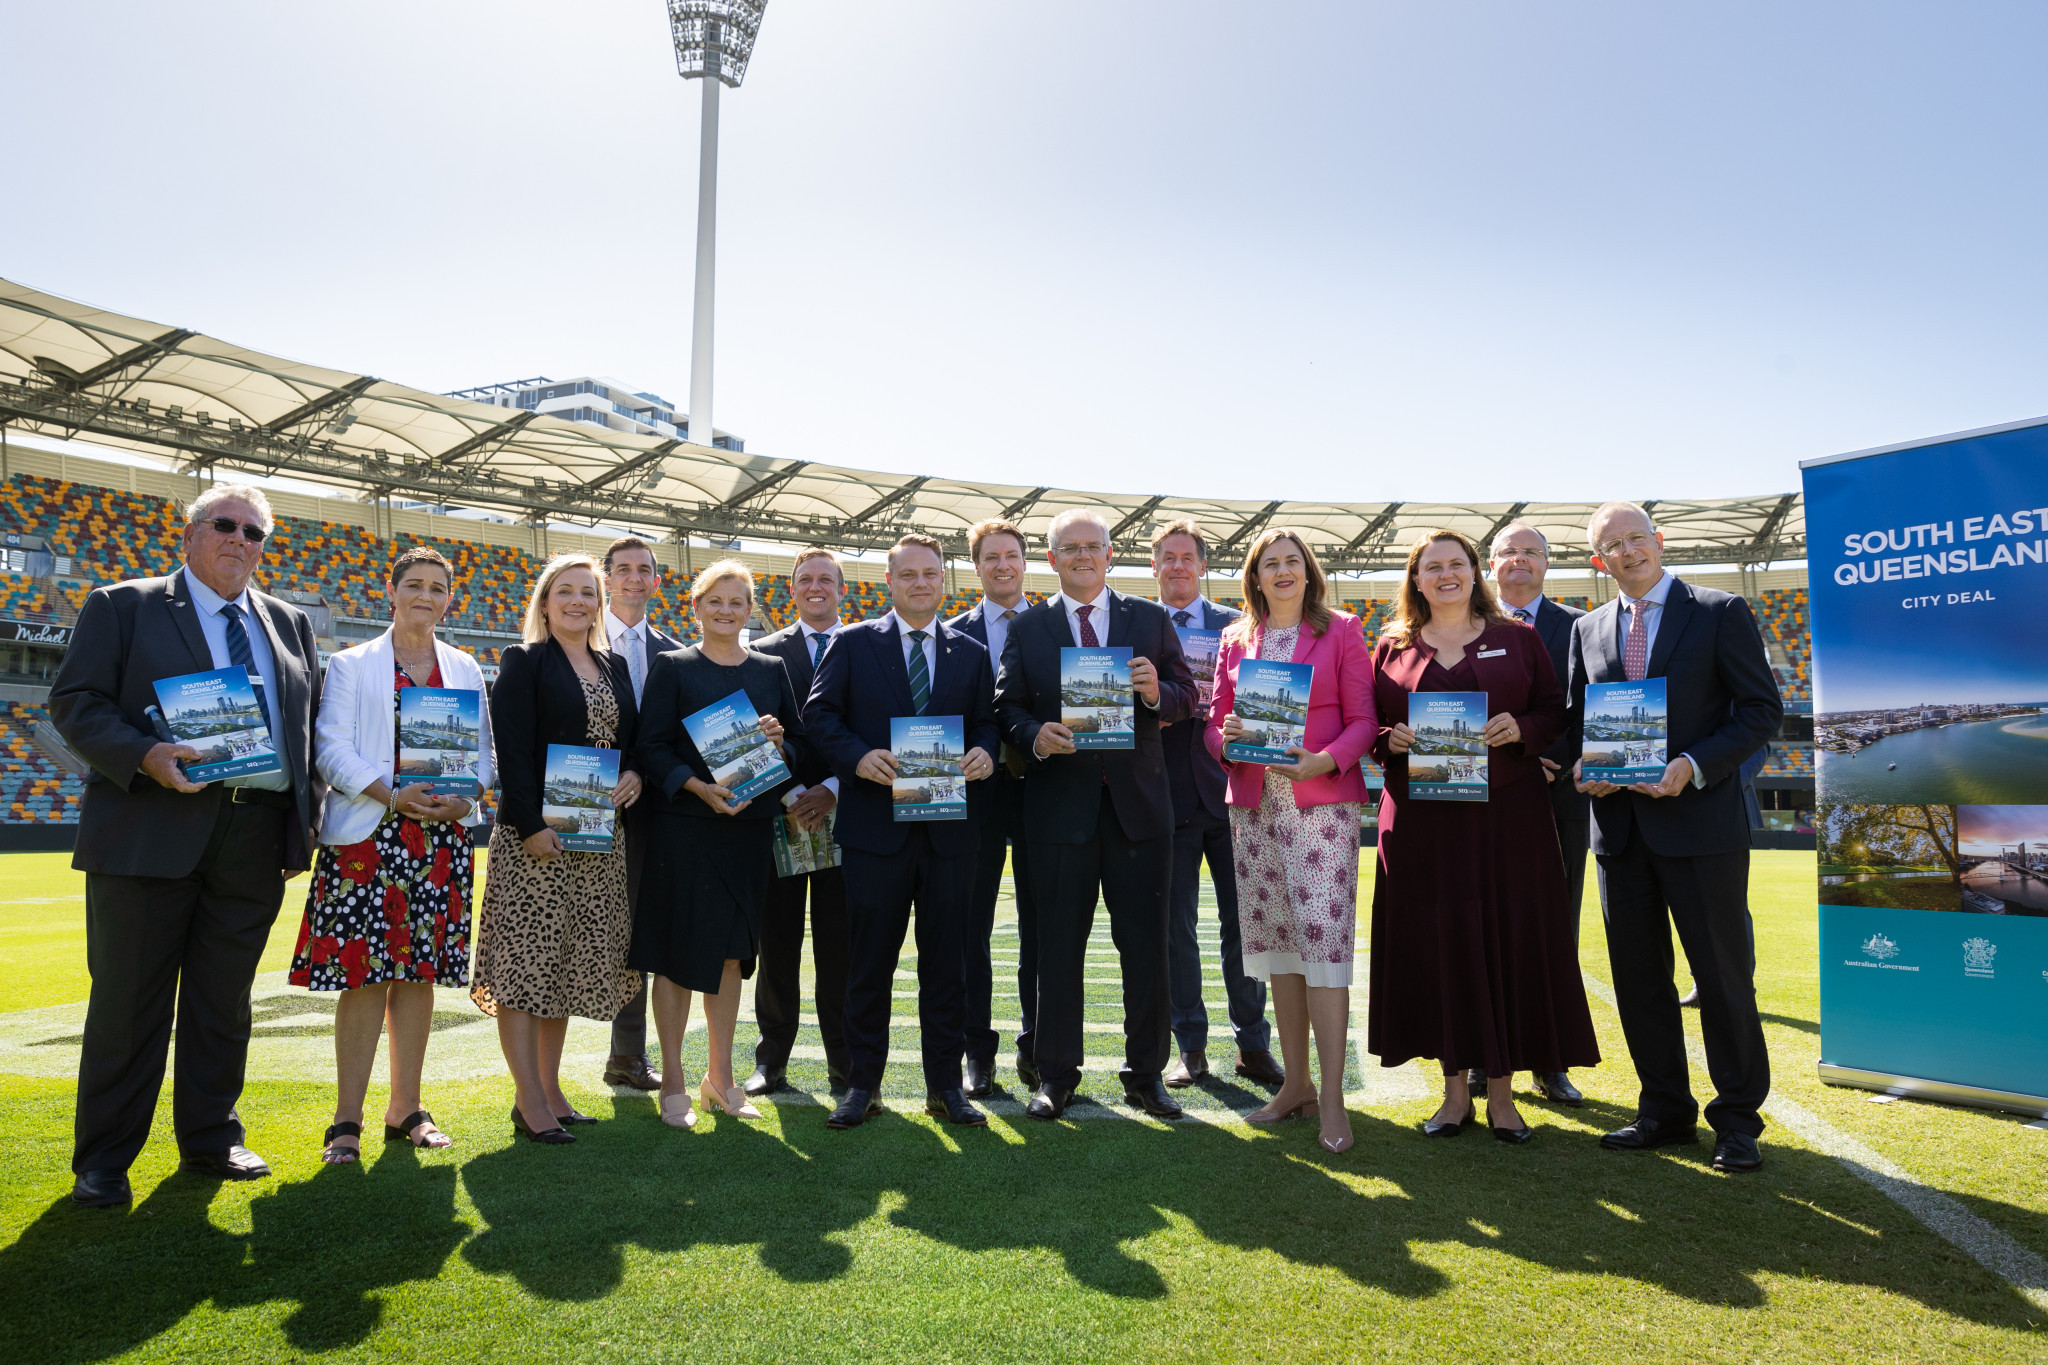 A reported $1.8 billion of investment will be made as part of the SEQ City Deal which will help Brisbane's preparations for the 2032 Olympic and Paralympic Games ©SEQ Council of Mayors